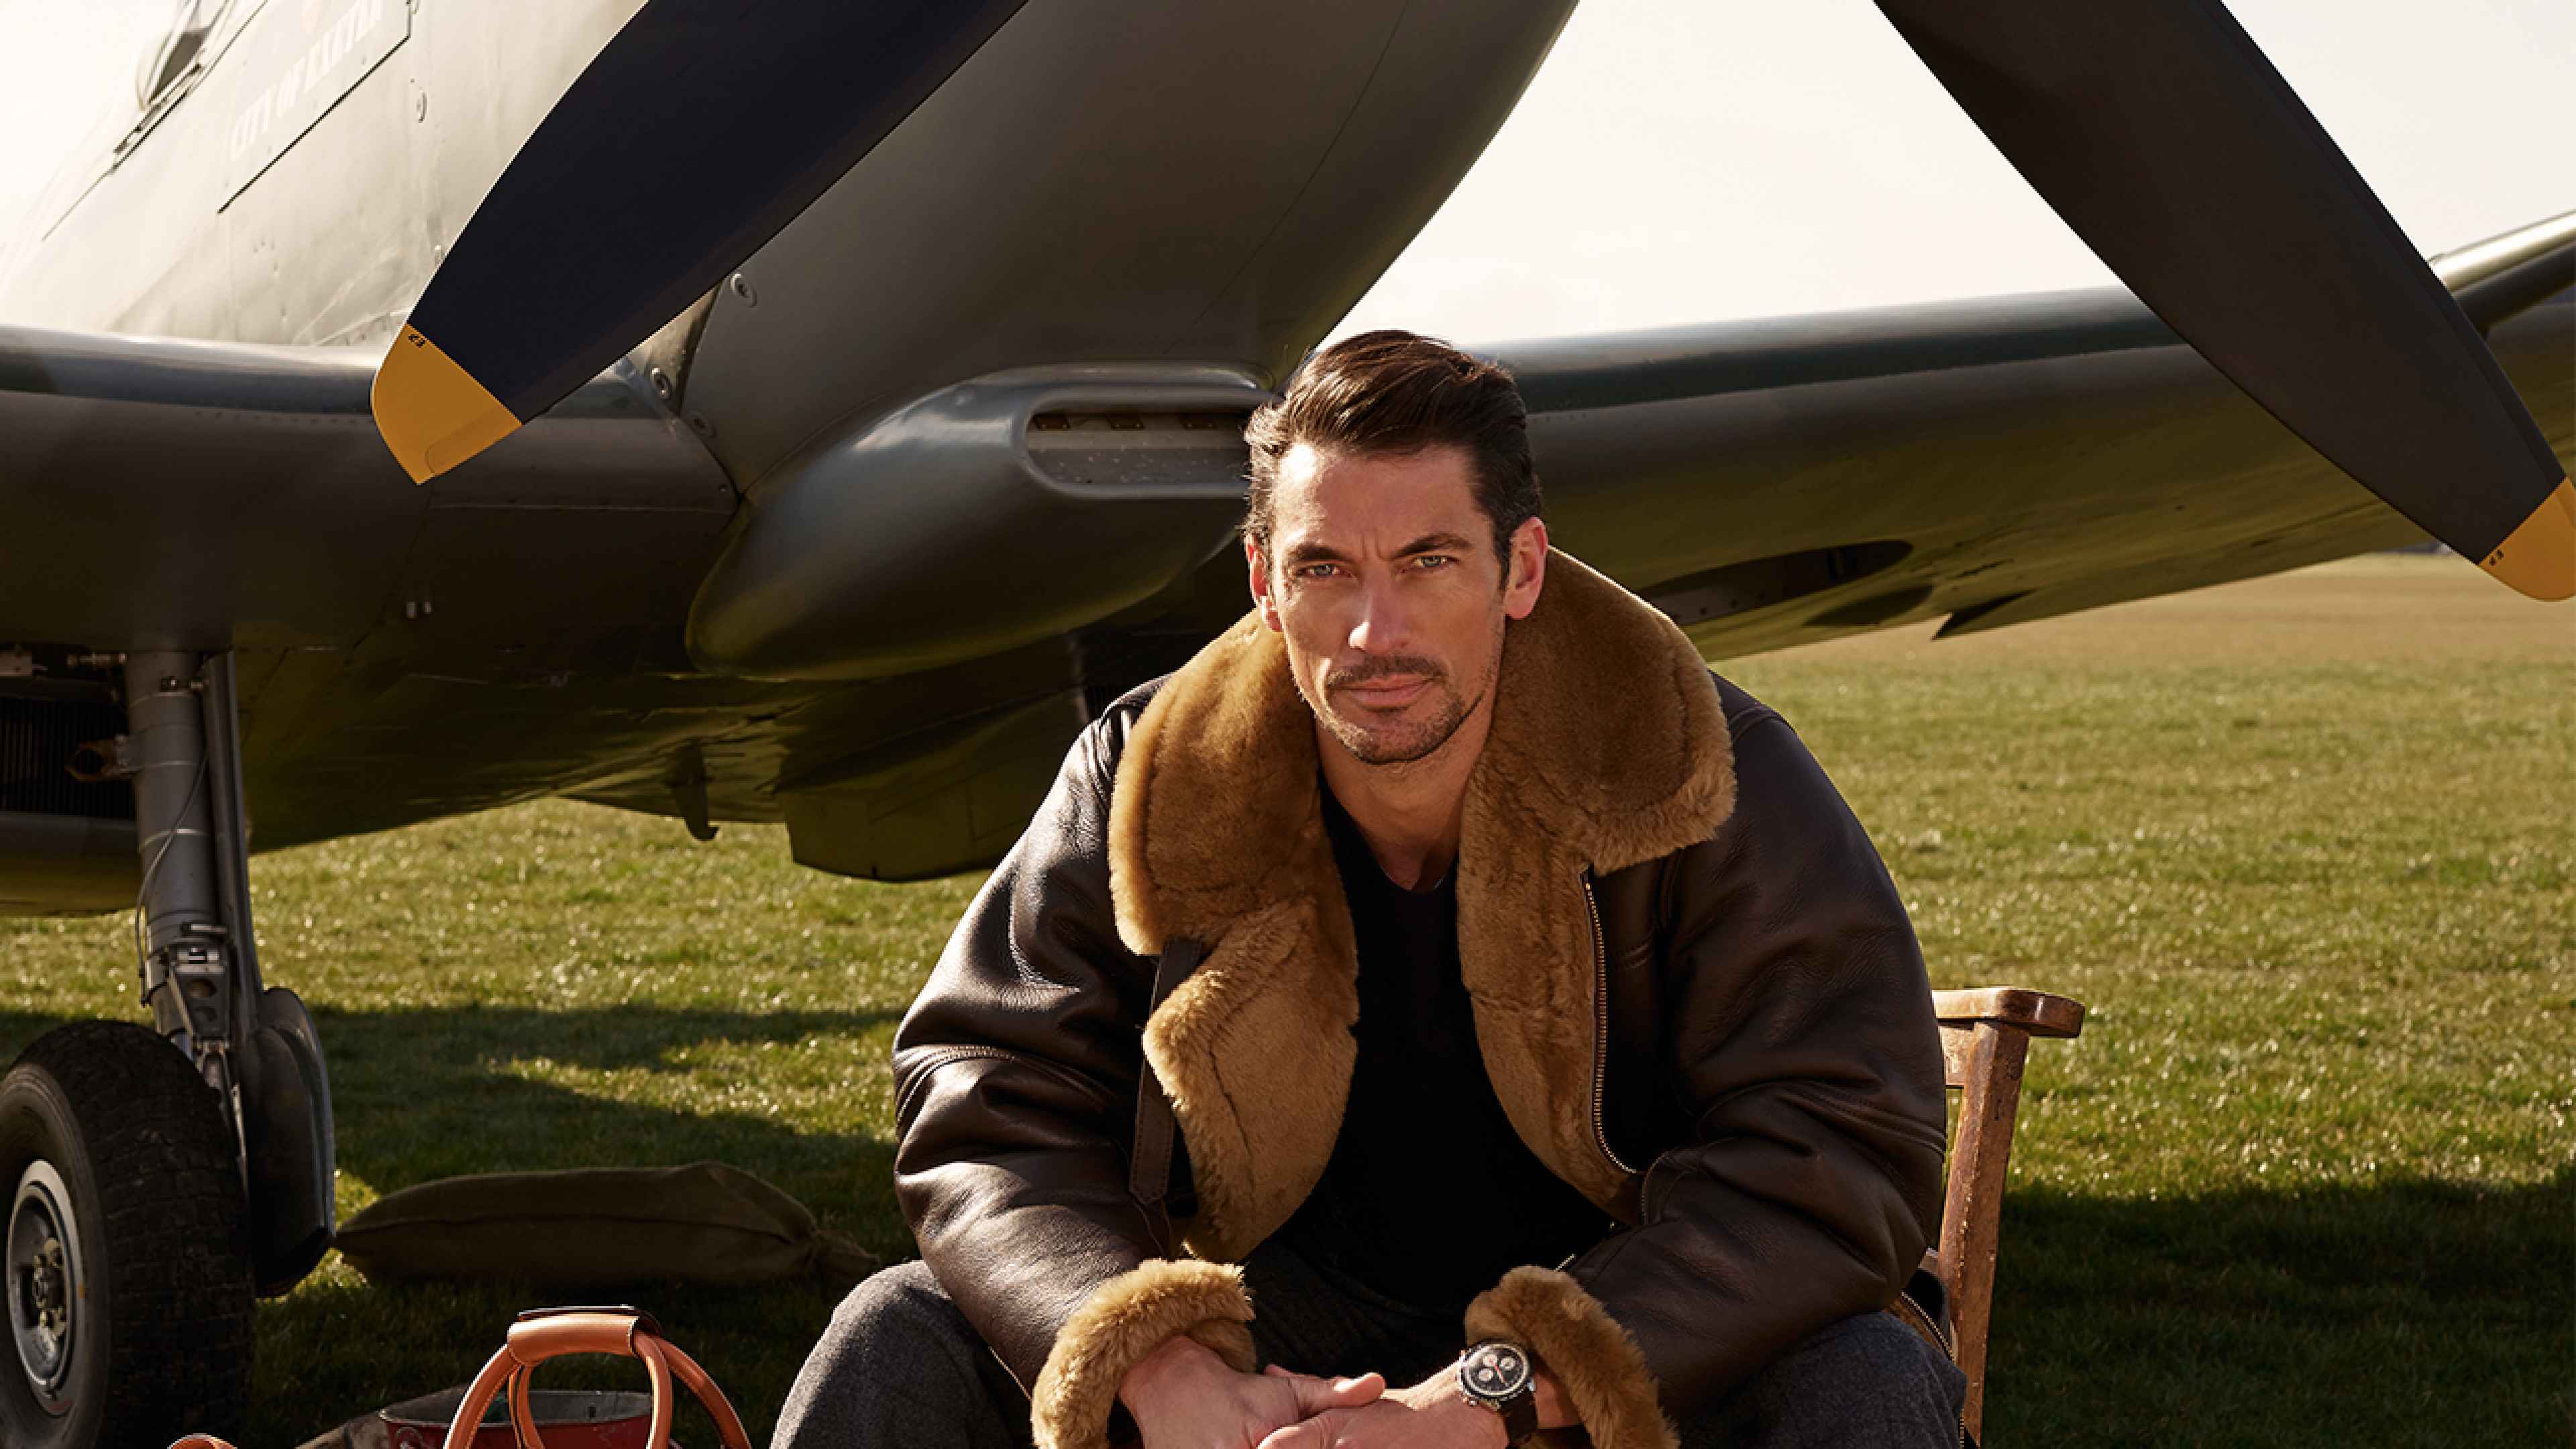 David Gandy on his future after modelling | Square Mile